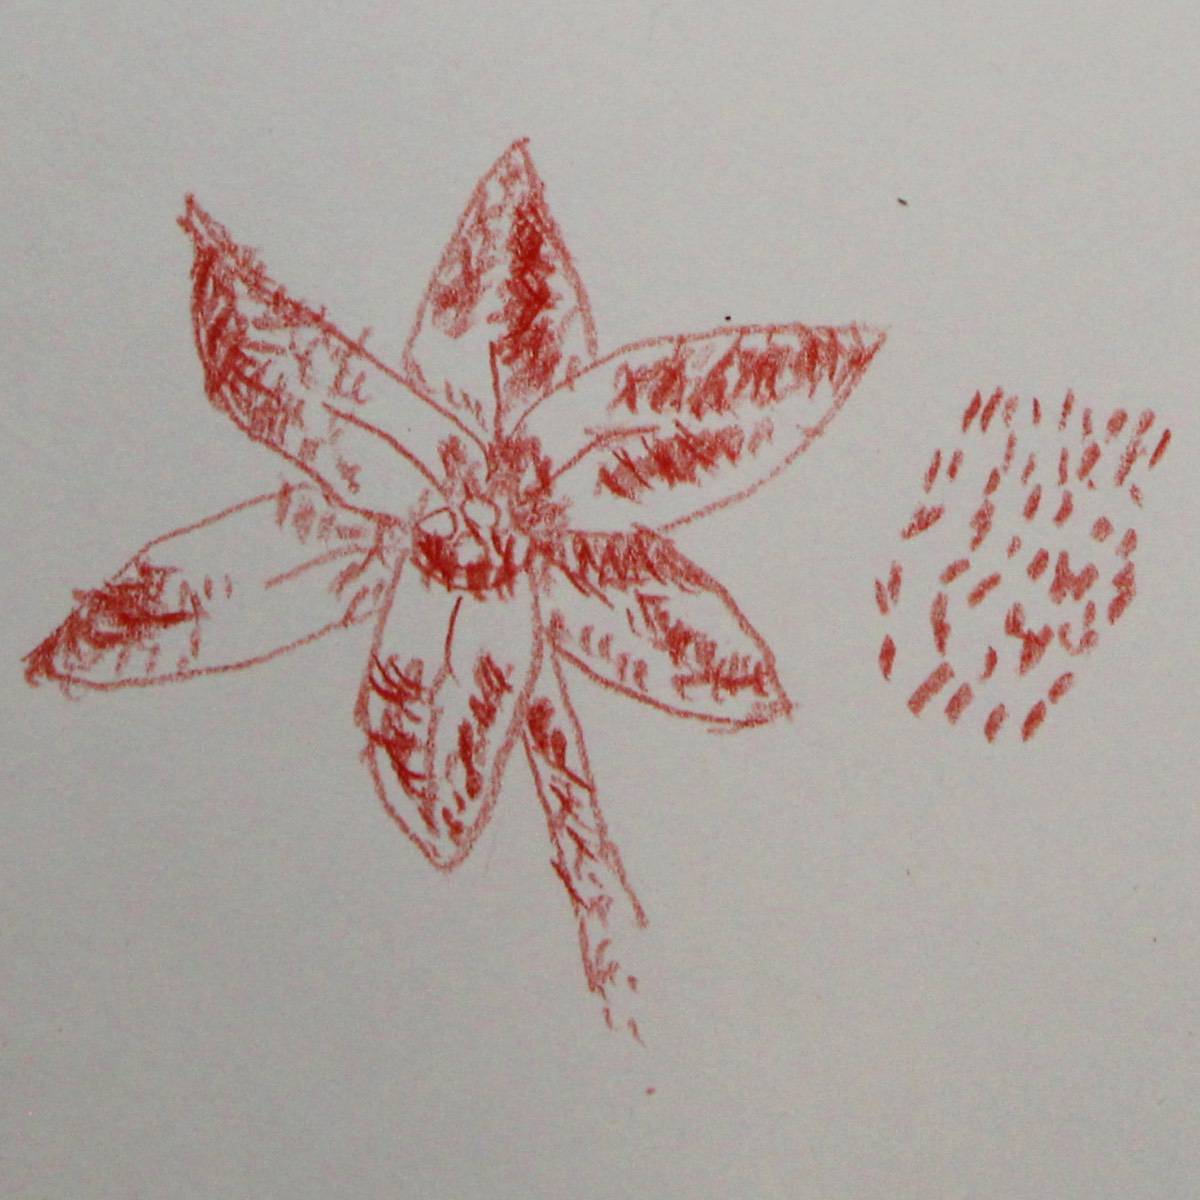 Red colored pencil is used to make a flower with six pointed petals, tick marks are used to add volume and texture.